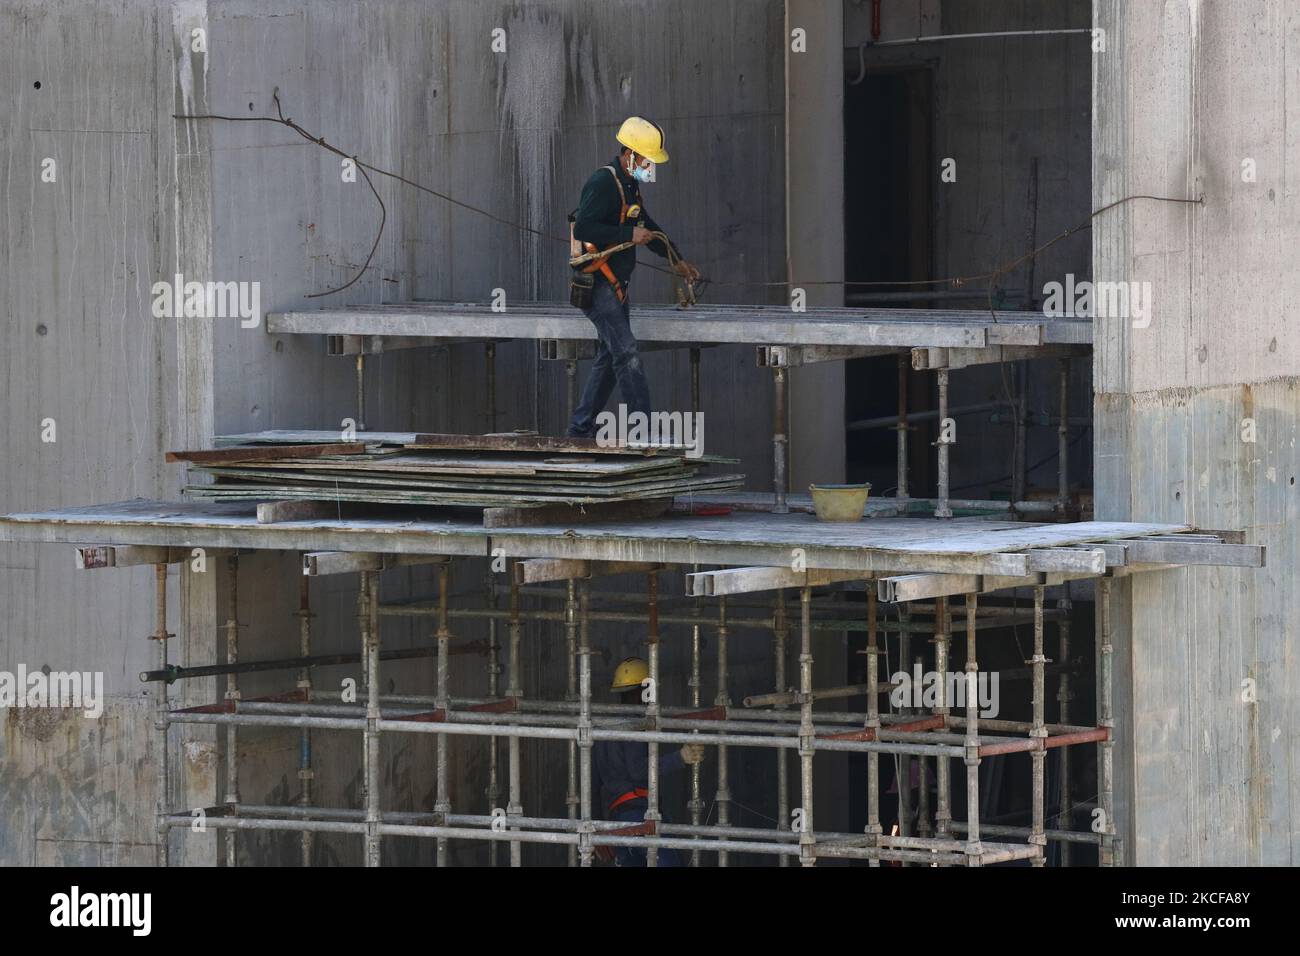 Migrant workers work at a building construction site on May 28, 2021 in Singapore. Singapore enters a month long heightened alert from May 16 to June 13 to curb the spread of COVID-19 cases in the local community. New restrictions on movements and activities have been introduced such as limiting social interaction to two, prohibiting dining out and a reduced operating capacity at shopping malls, offices and attractions. On May 17, the construction industry stakeholders appealed to Multi-Ministry Taskforce to bring in foreign workers in a safe and controlled manner after the built environment i Stock Photo